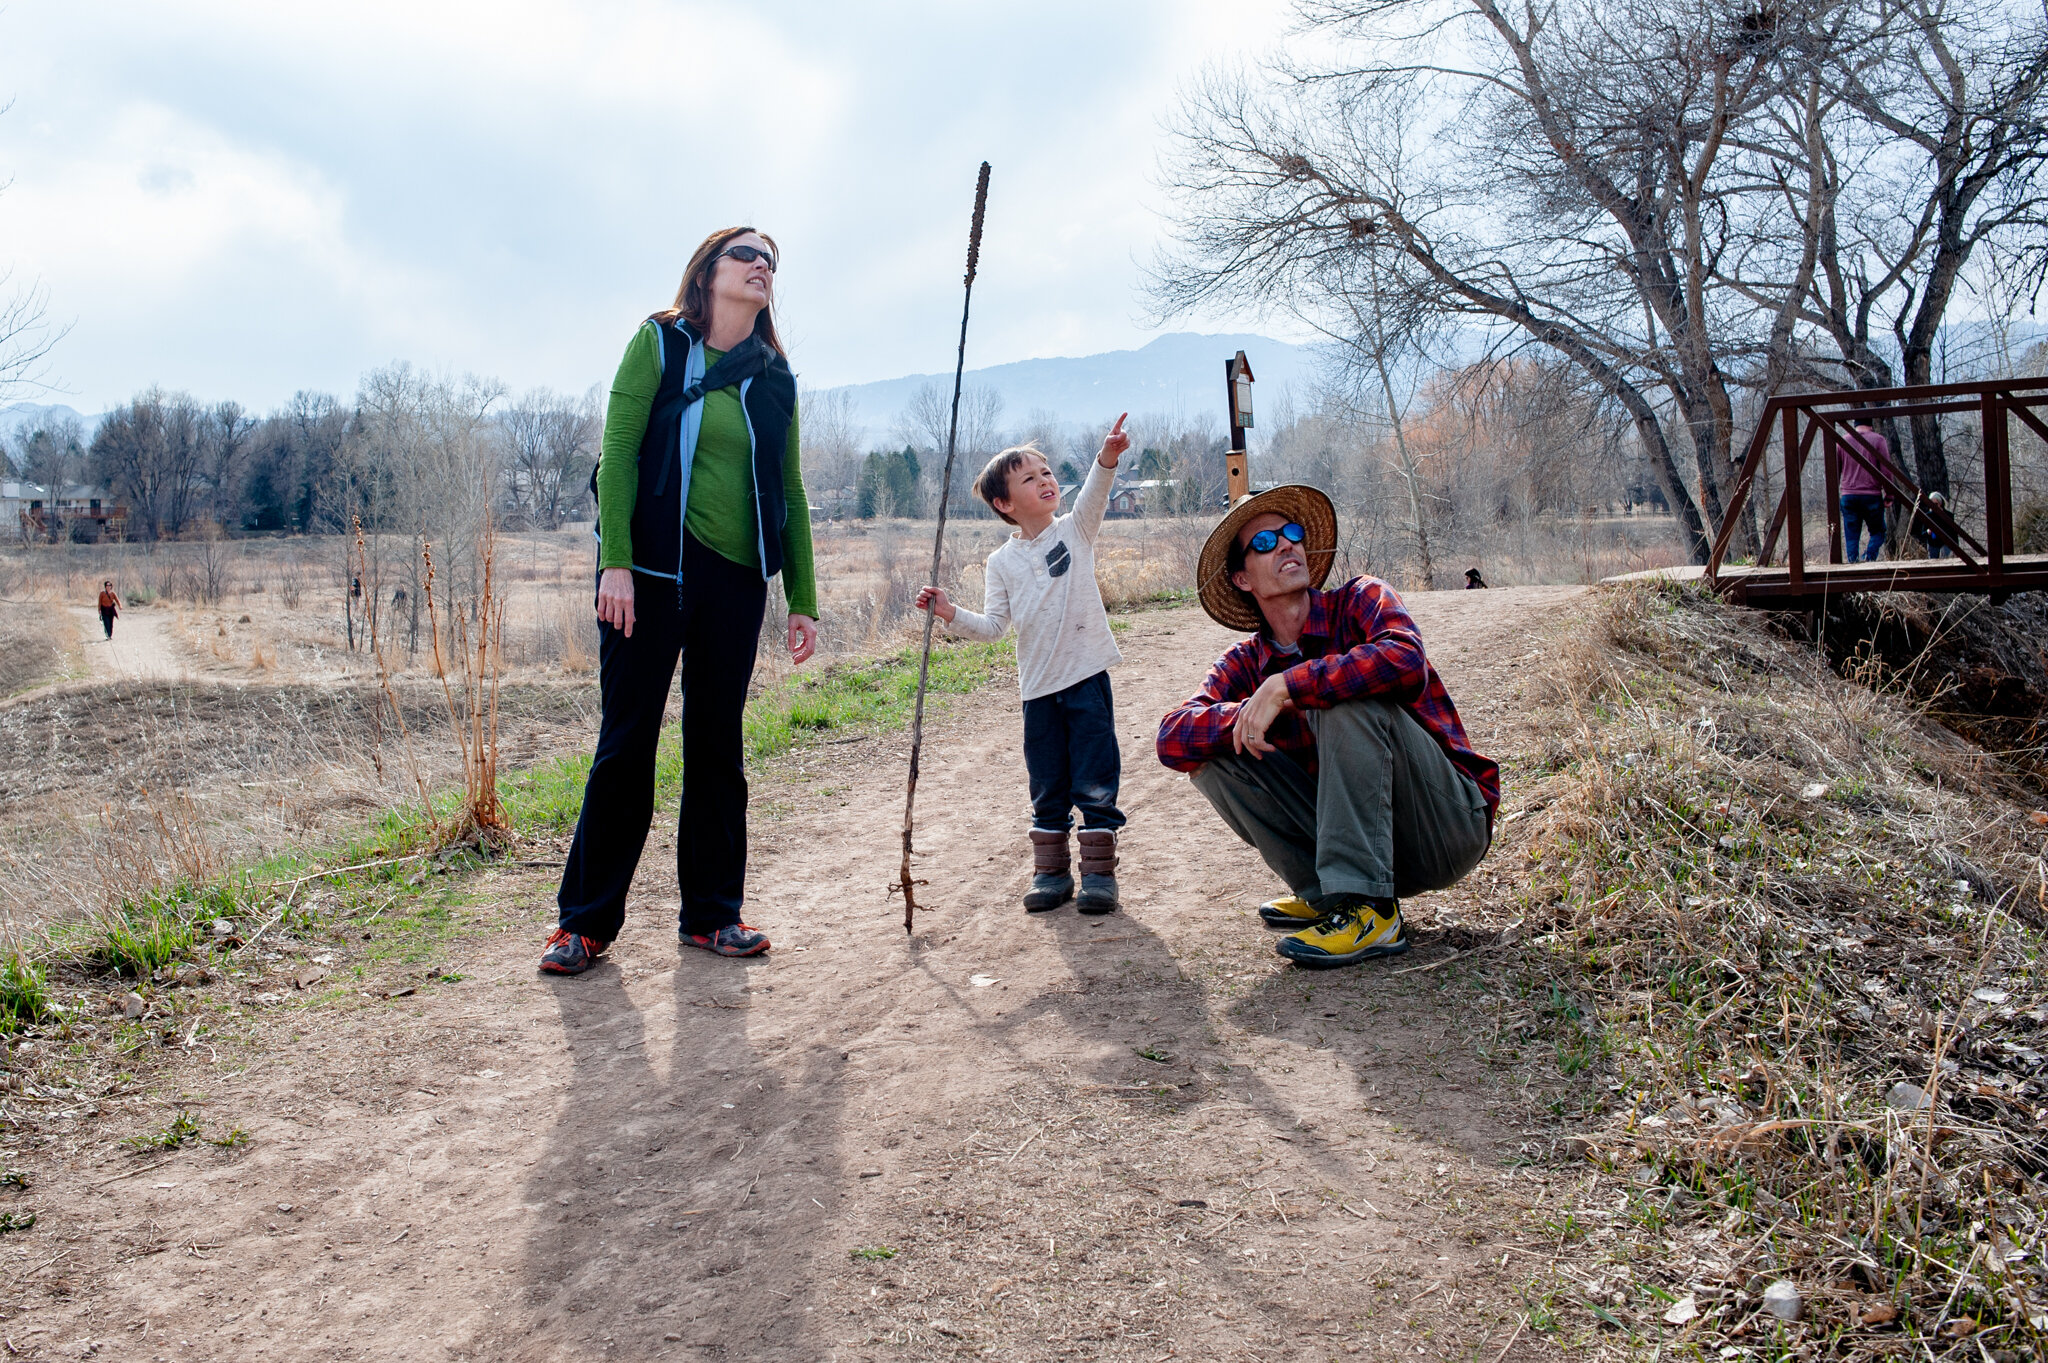  Cindy Kroeger, Brian Kraus and their son Oliver Kraus, 6, look at a bird in Red Fox Meadows Natural Area in Fort Collins on Wednesday, March 18, 2020. Kroeger said that other than cancelling their spring break trip to Missouri, things have seemed pr